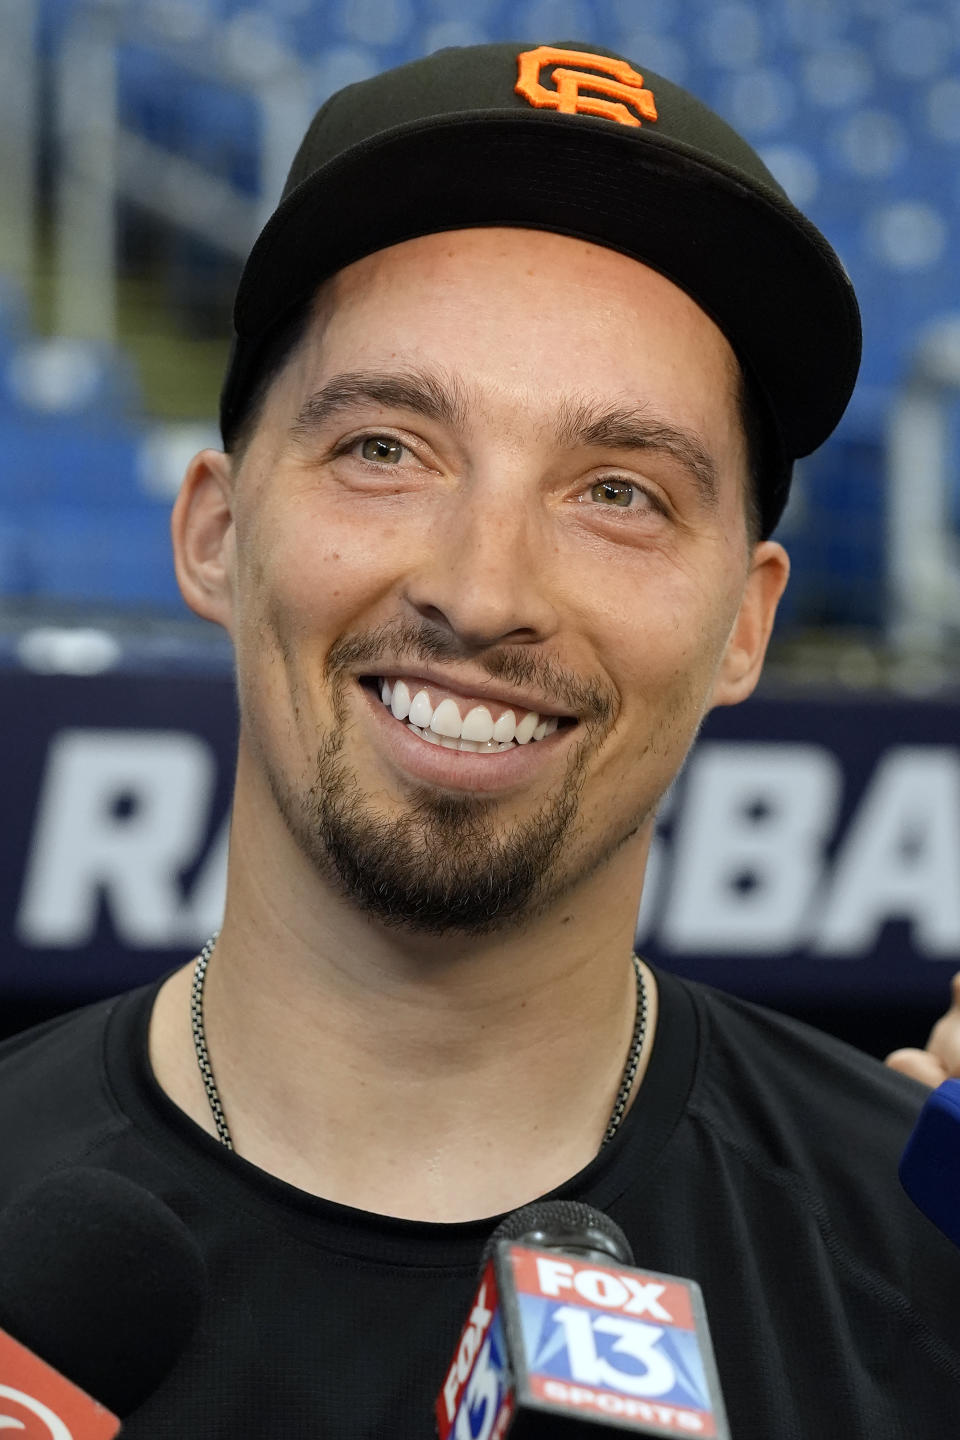 San Francisco Giants pitcher Blake Snell speaks to the media before a baseball game against the Tampa Bay Rays, Friday, April 12, 2024, in St. Petersburg, Fla. Snell, a former pitcher for the Rays, is making his first trip to Tropicana Field since leaving the team. (AP Photo/Chris O'Meara)